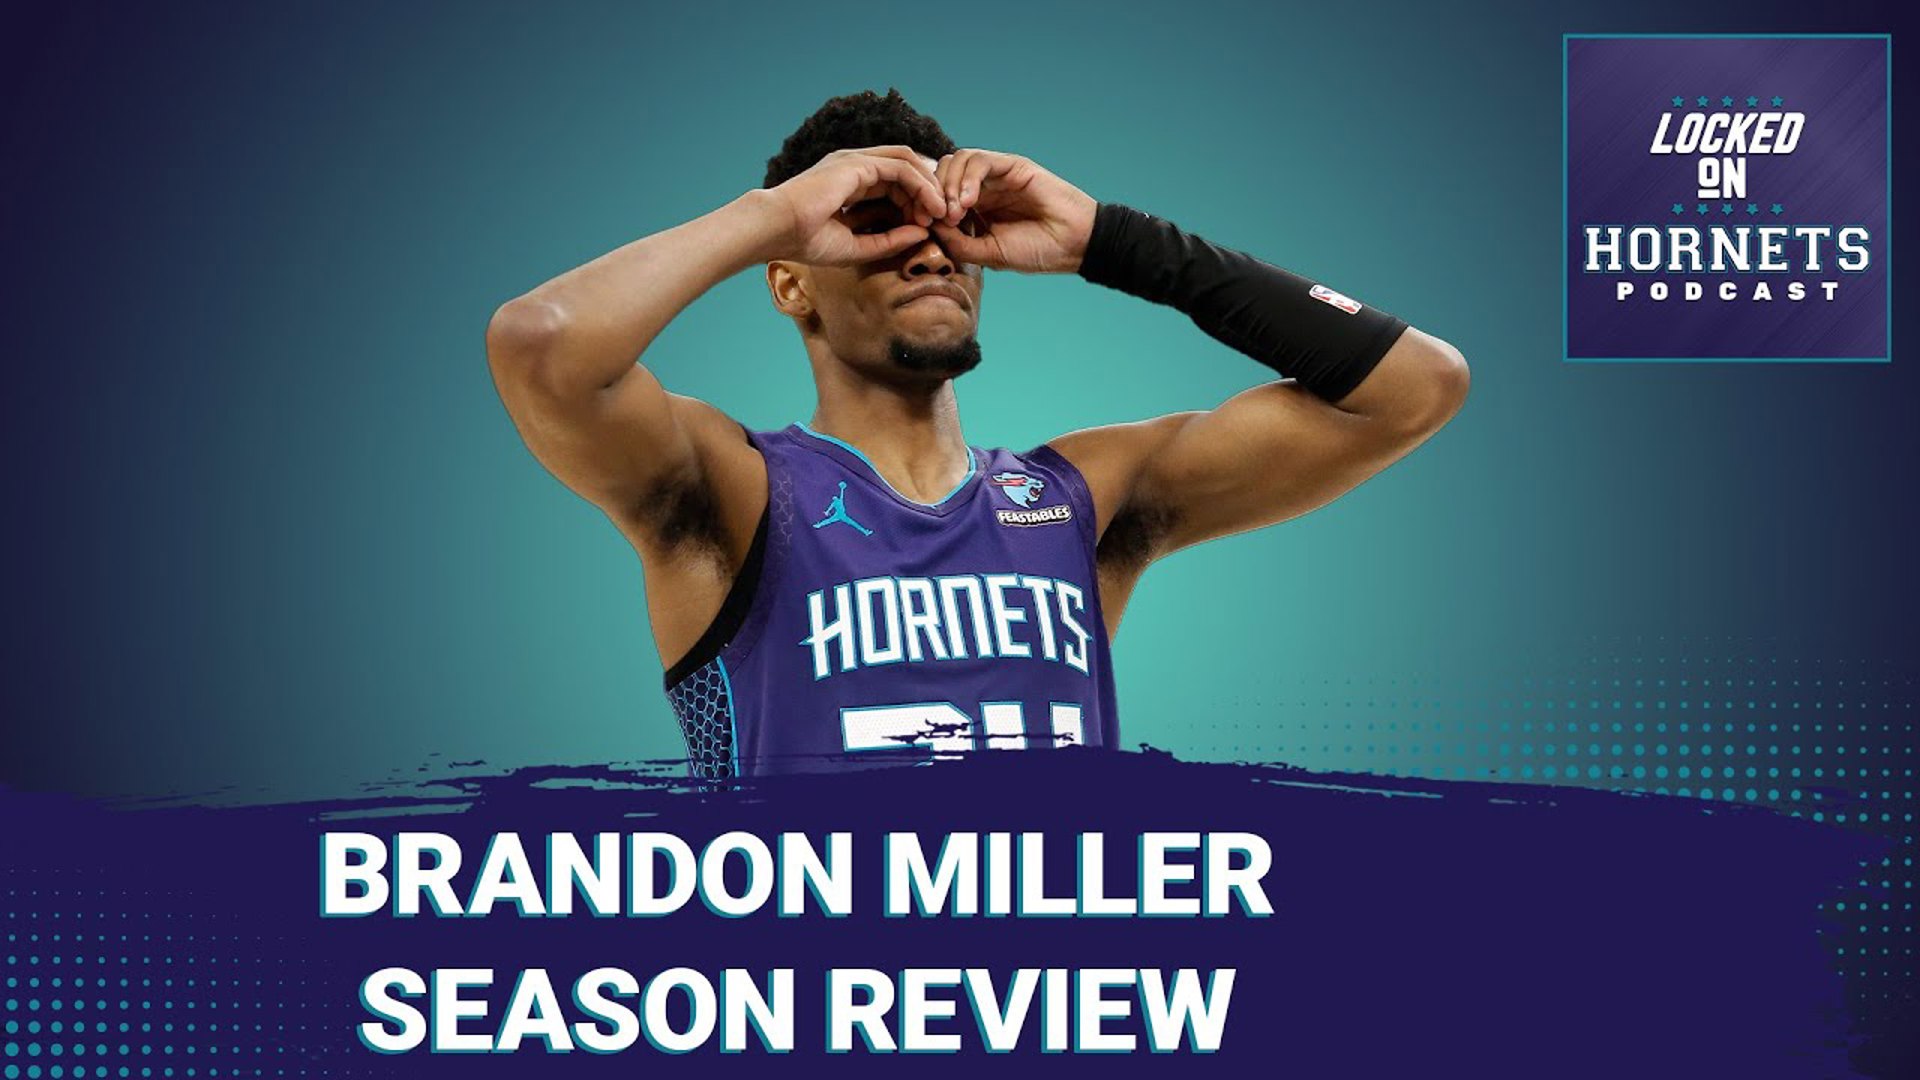 Season in Review: What went right for Brandon Miller? Sickos Sound off on possible Redick hire